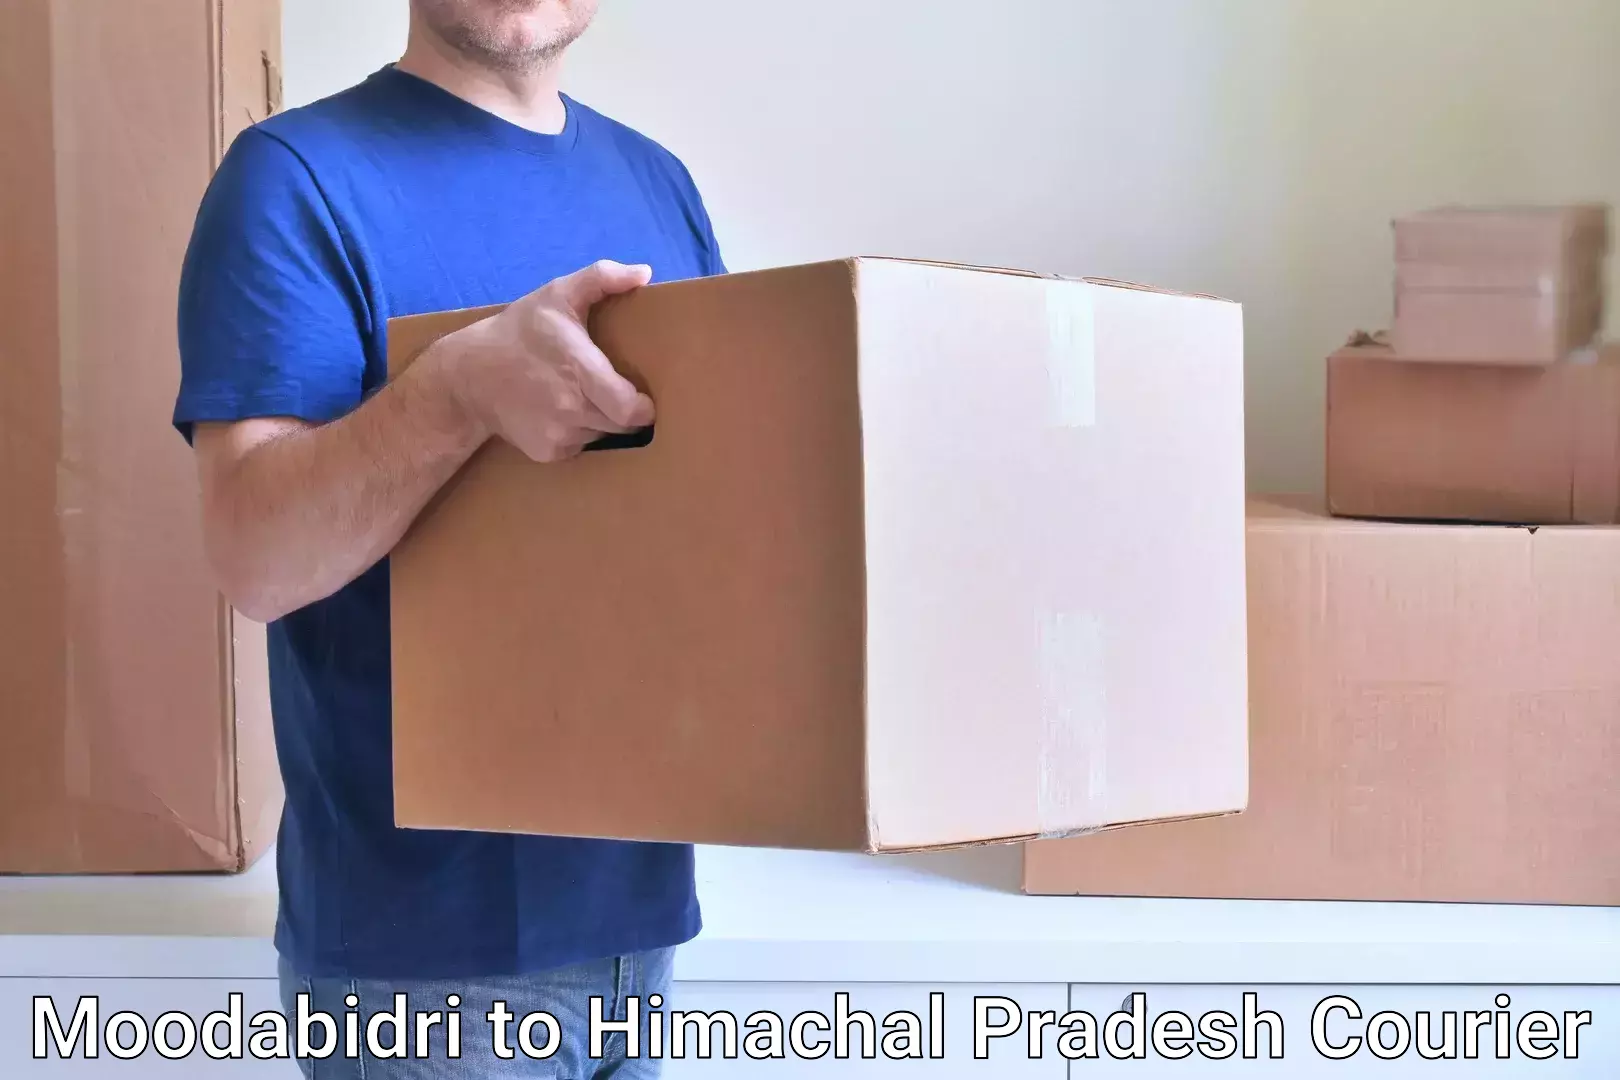 Easy access courier services in Moodabidri to Himachal Pradesh